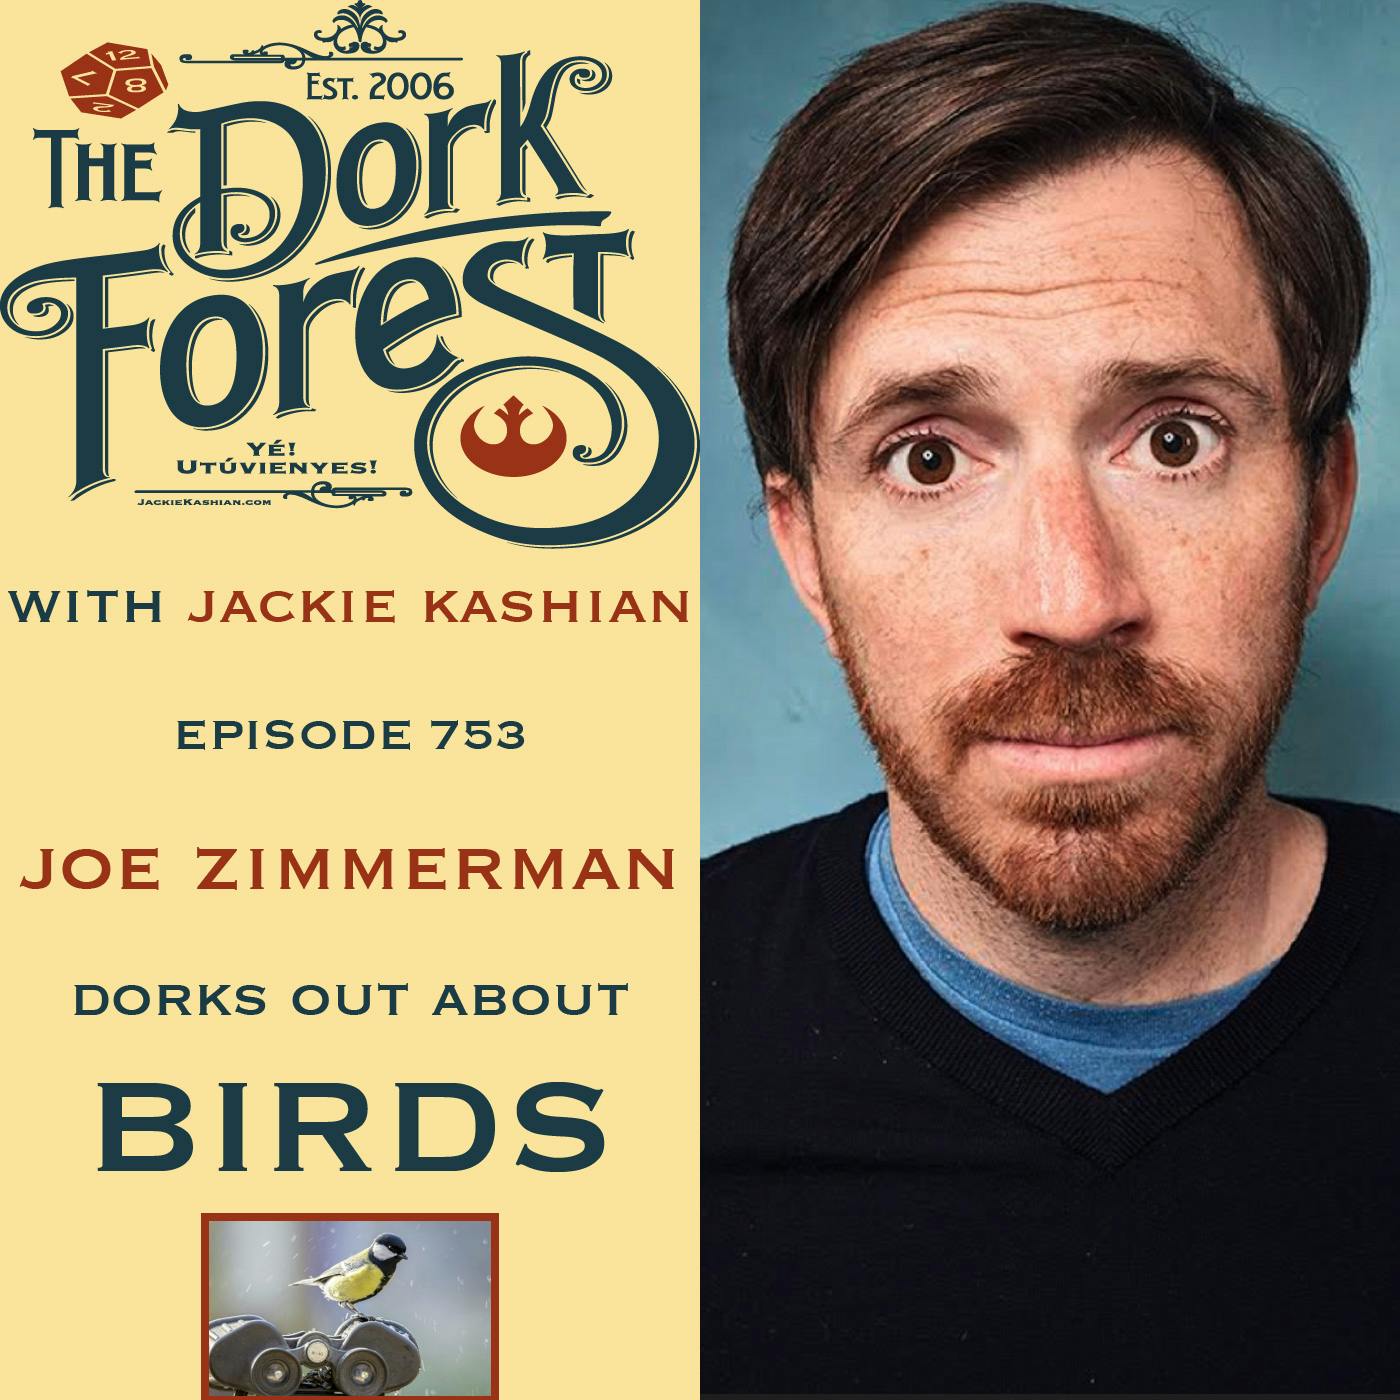 Joe Zimmerman gets up early to see BIRDS – EP 753